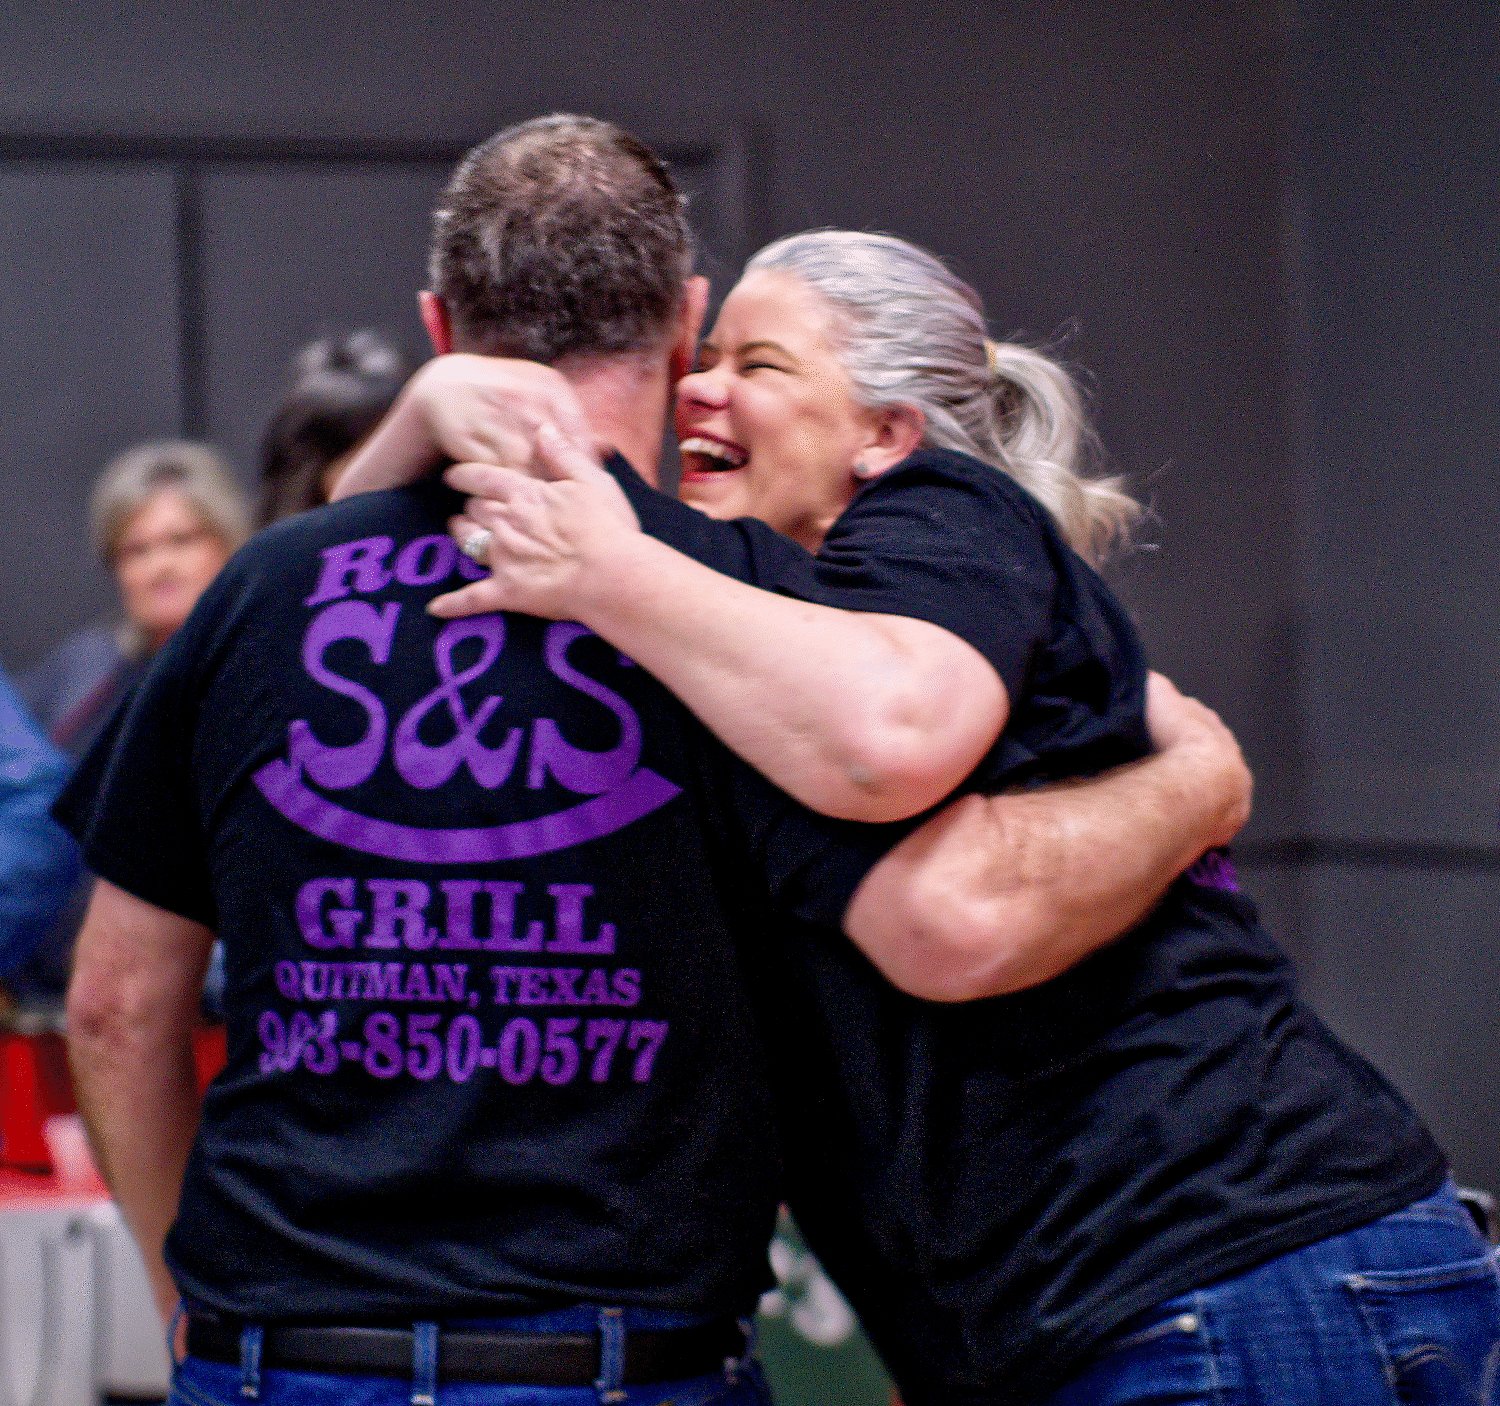 Steven and Samantha Krell celebrate winning the judges' choice award for best chili.  [find more fundraiser photos]